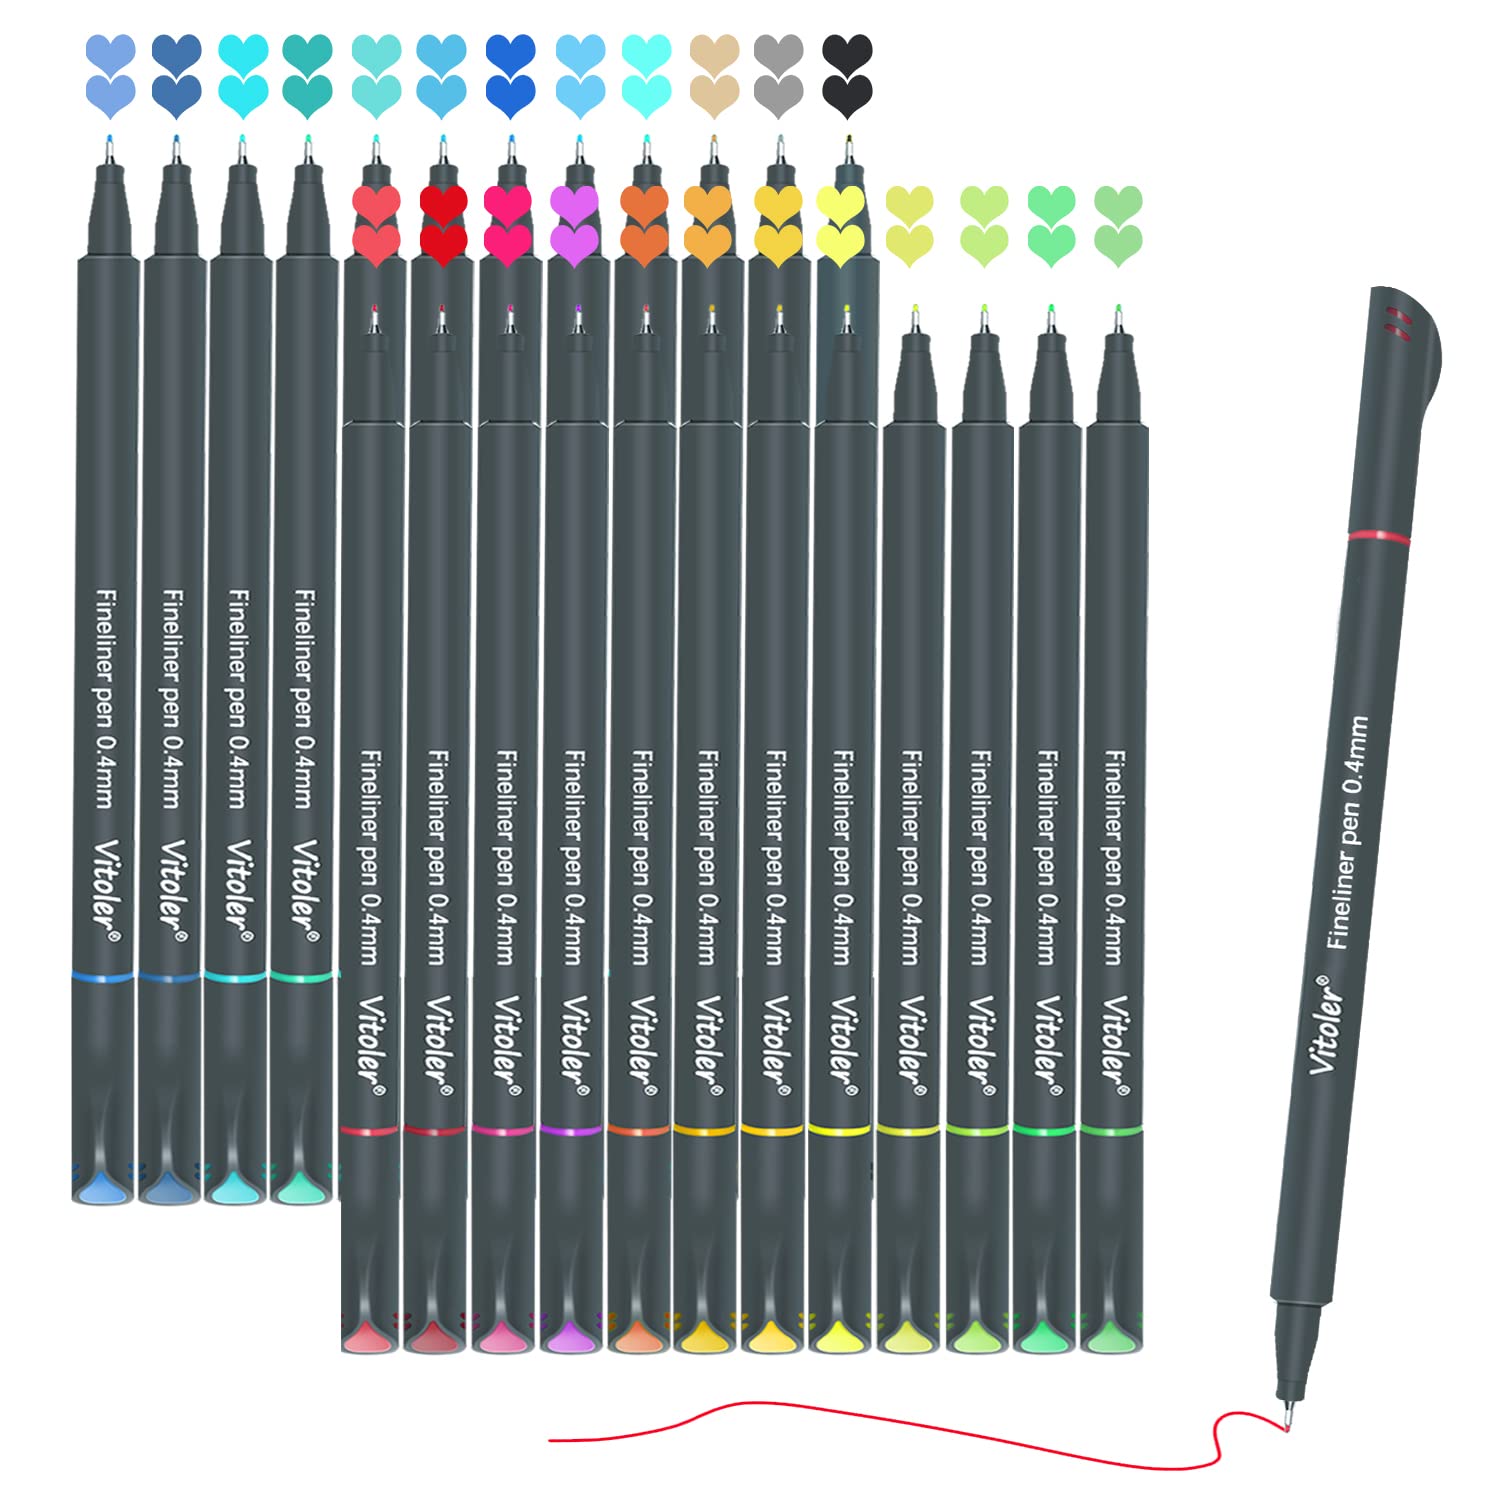 Vitoler 36 VIBRANT Colored Pens, Fine Tip Journal Planner Pens,Drawing  Marker Pens for Writing Journaling Planner Coloring Book Sketching Taking  Note